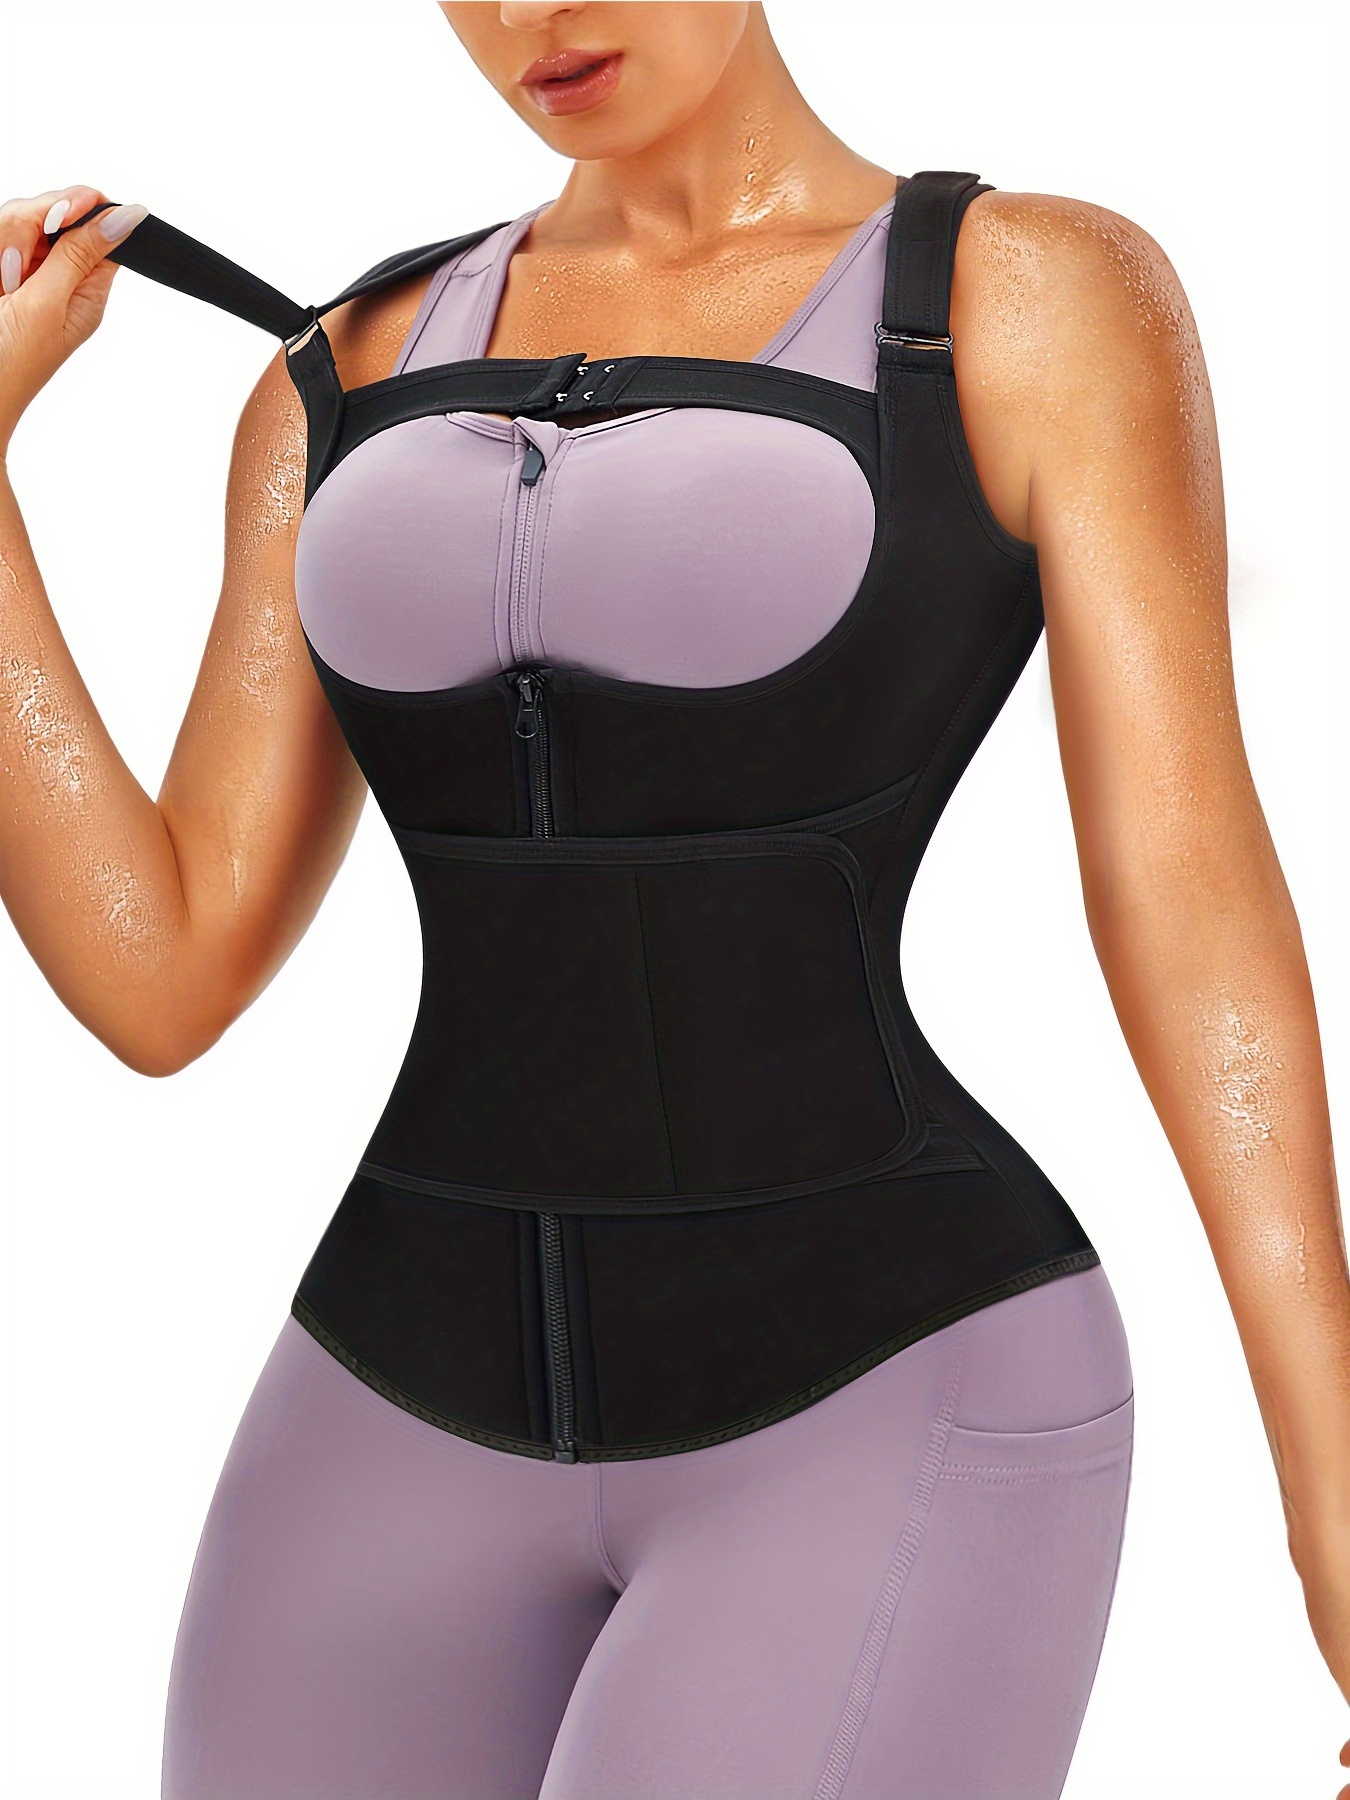 Gotoly Women Waist Trainer Corset Cincher Belt Tummy Control Shapewear  Weight Loss Workout Trimmer Slimming Girdle Belly Band (Small) Black :  : Clothing, Shoes & Accessories